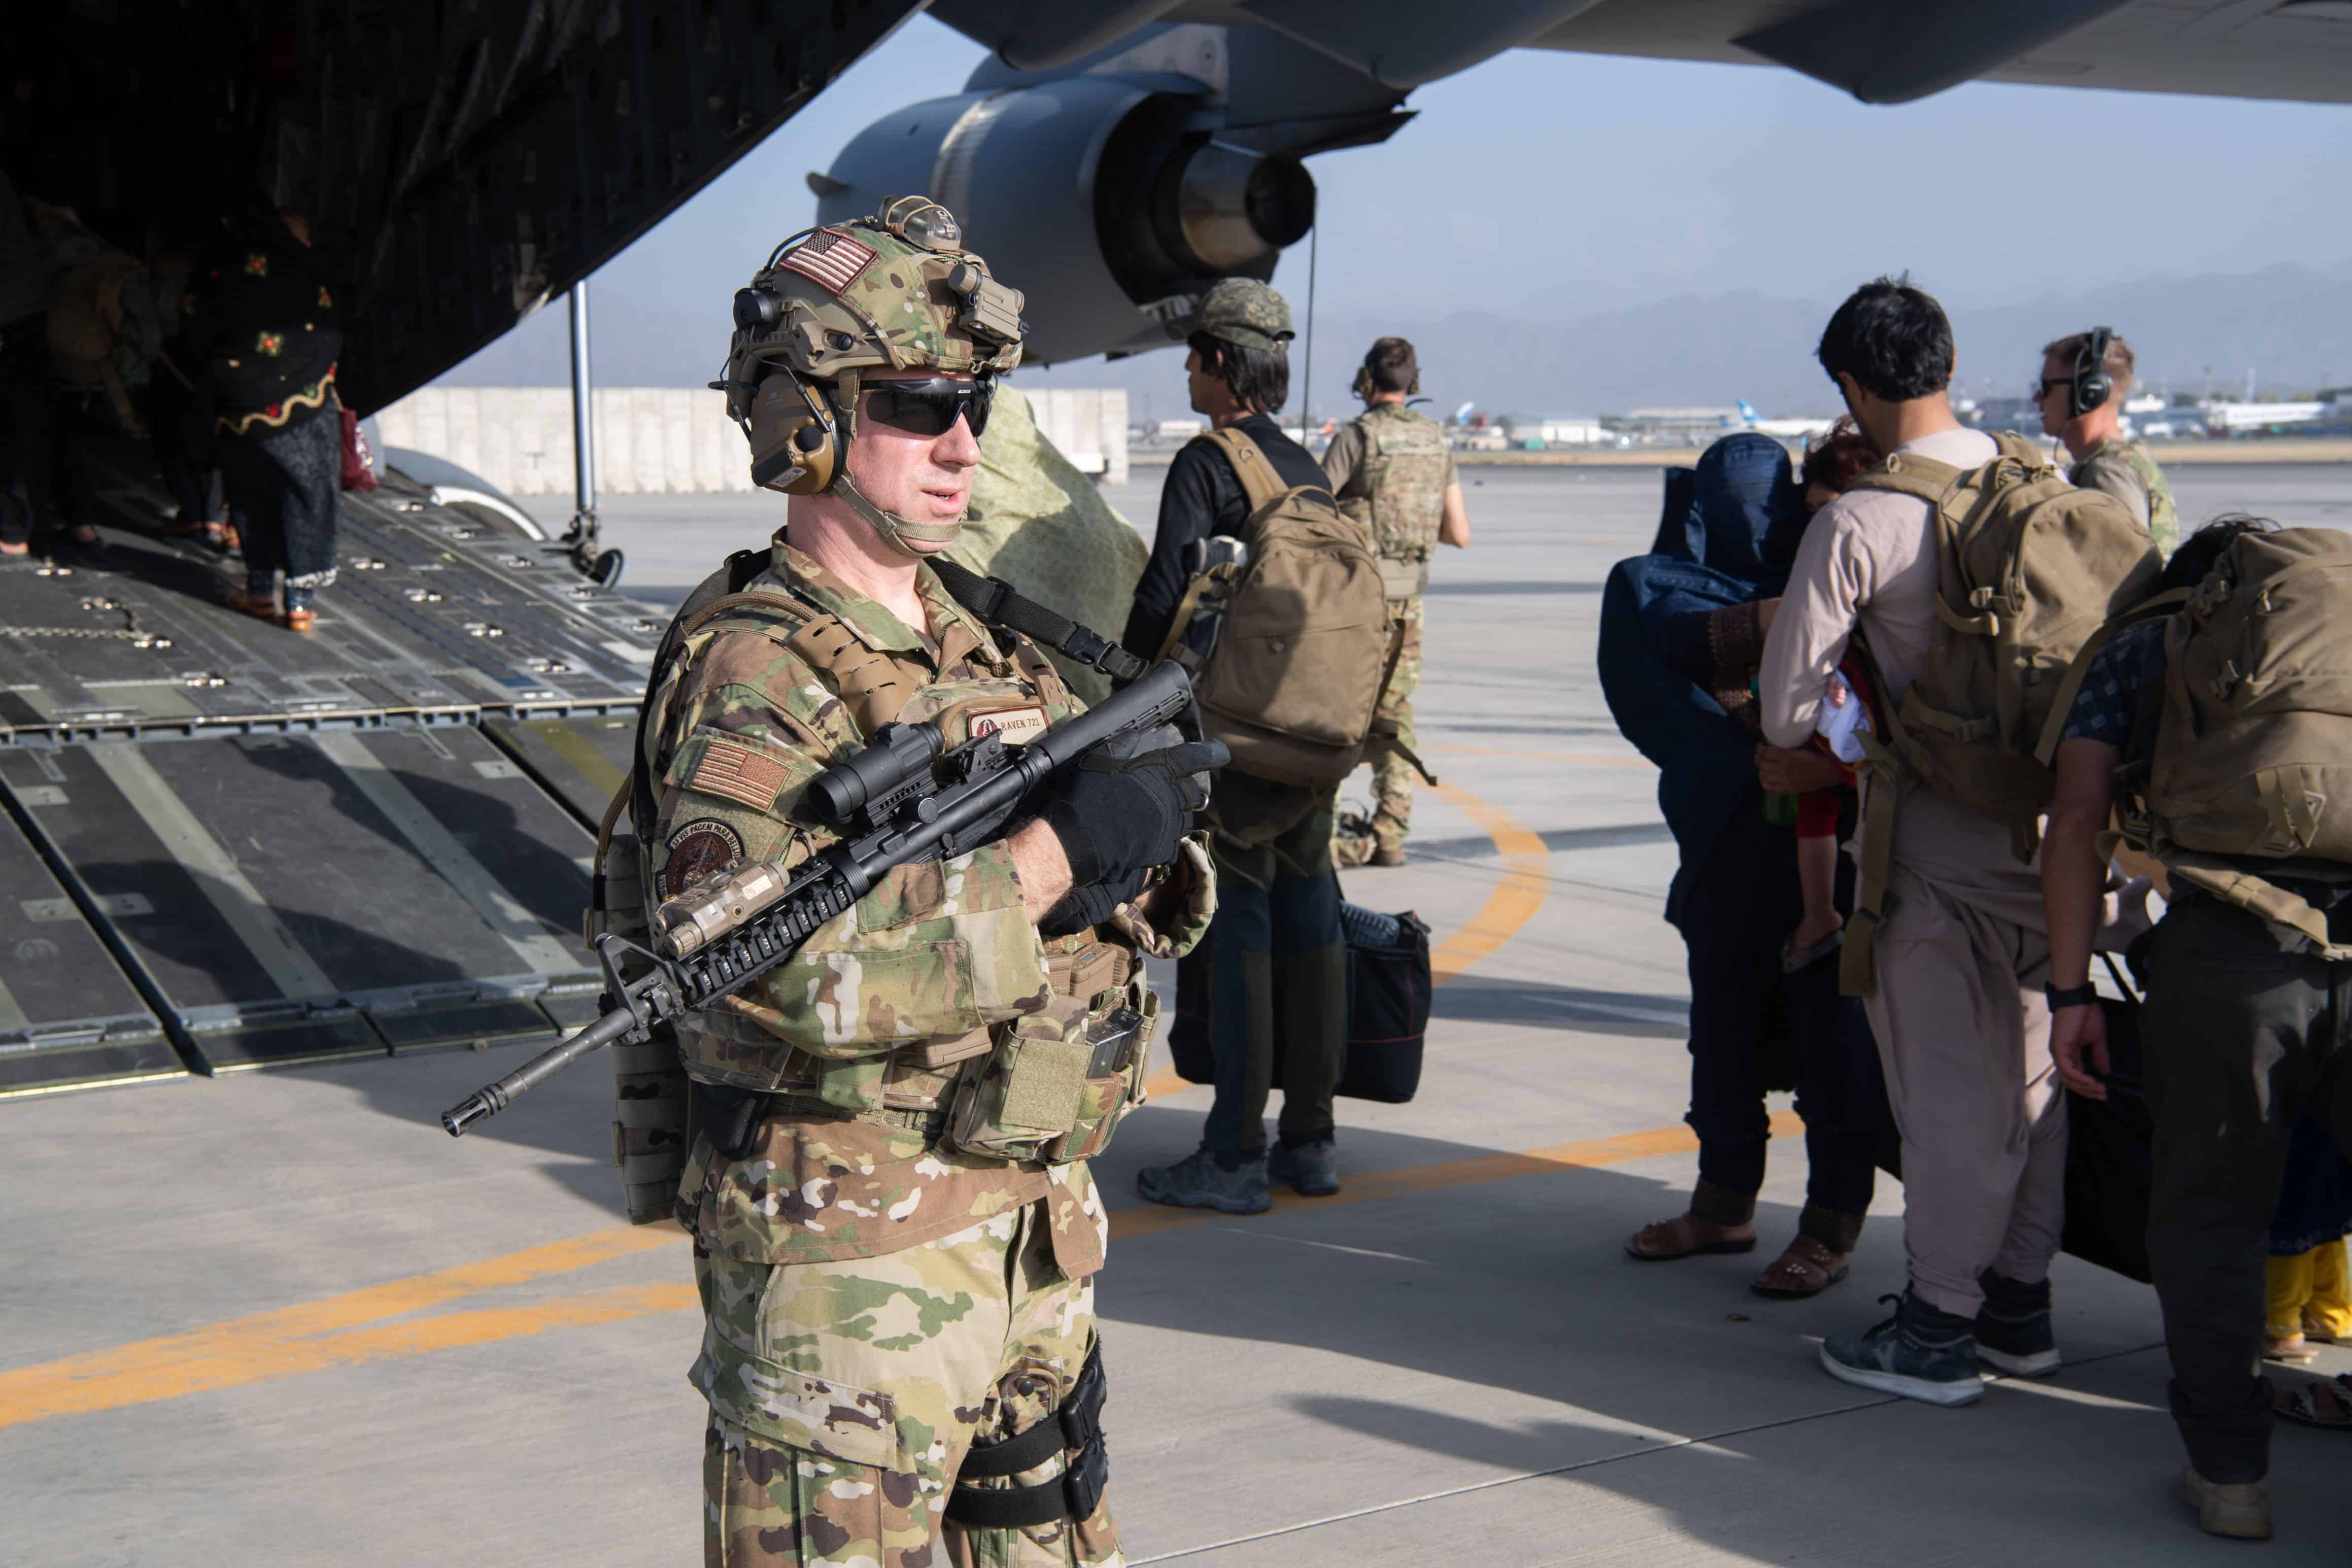 A U.S. Air Force security forces raven, assigned to the 816th Expeditionary Airlift Squadron, maintain a security cordon around a U.S. Air Force C-17 Globemaster III aircraftin support of the Afghanistan evacuation at Hamid Karzai International Airport (HKIA), Afghanistan, Aug. 24, 2021. (U.S. Air Force photo by Master Sgt. Donald R. Allen)